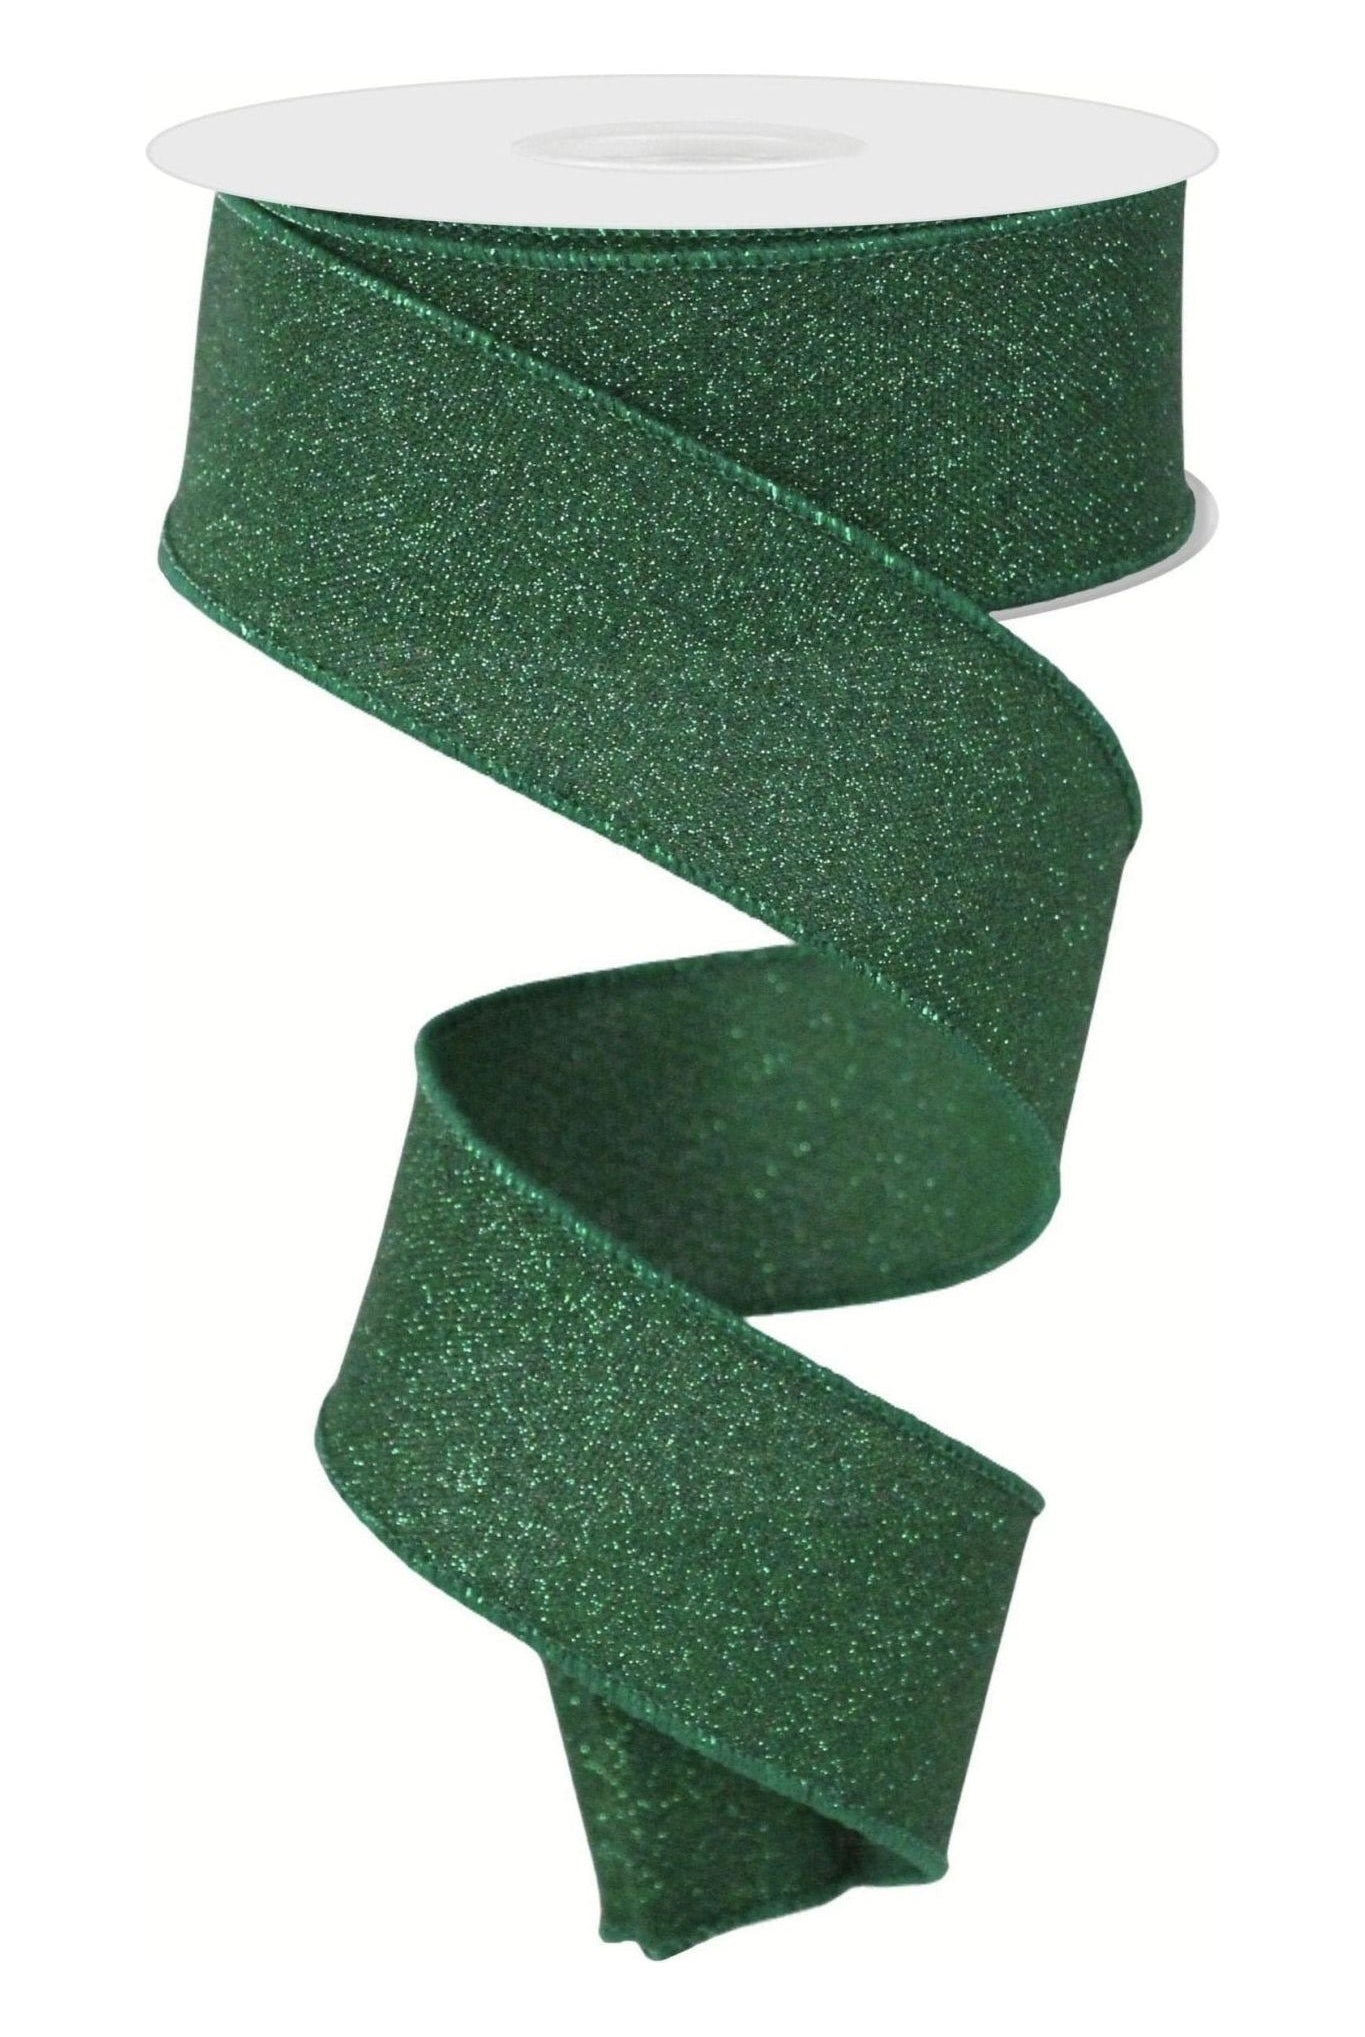 Shop For 1.5" Fine Glitter On Faux Royal: Emerald Green (10 Yards) RGE178906